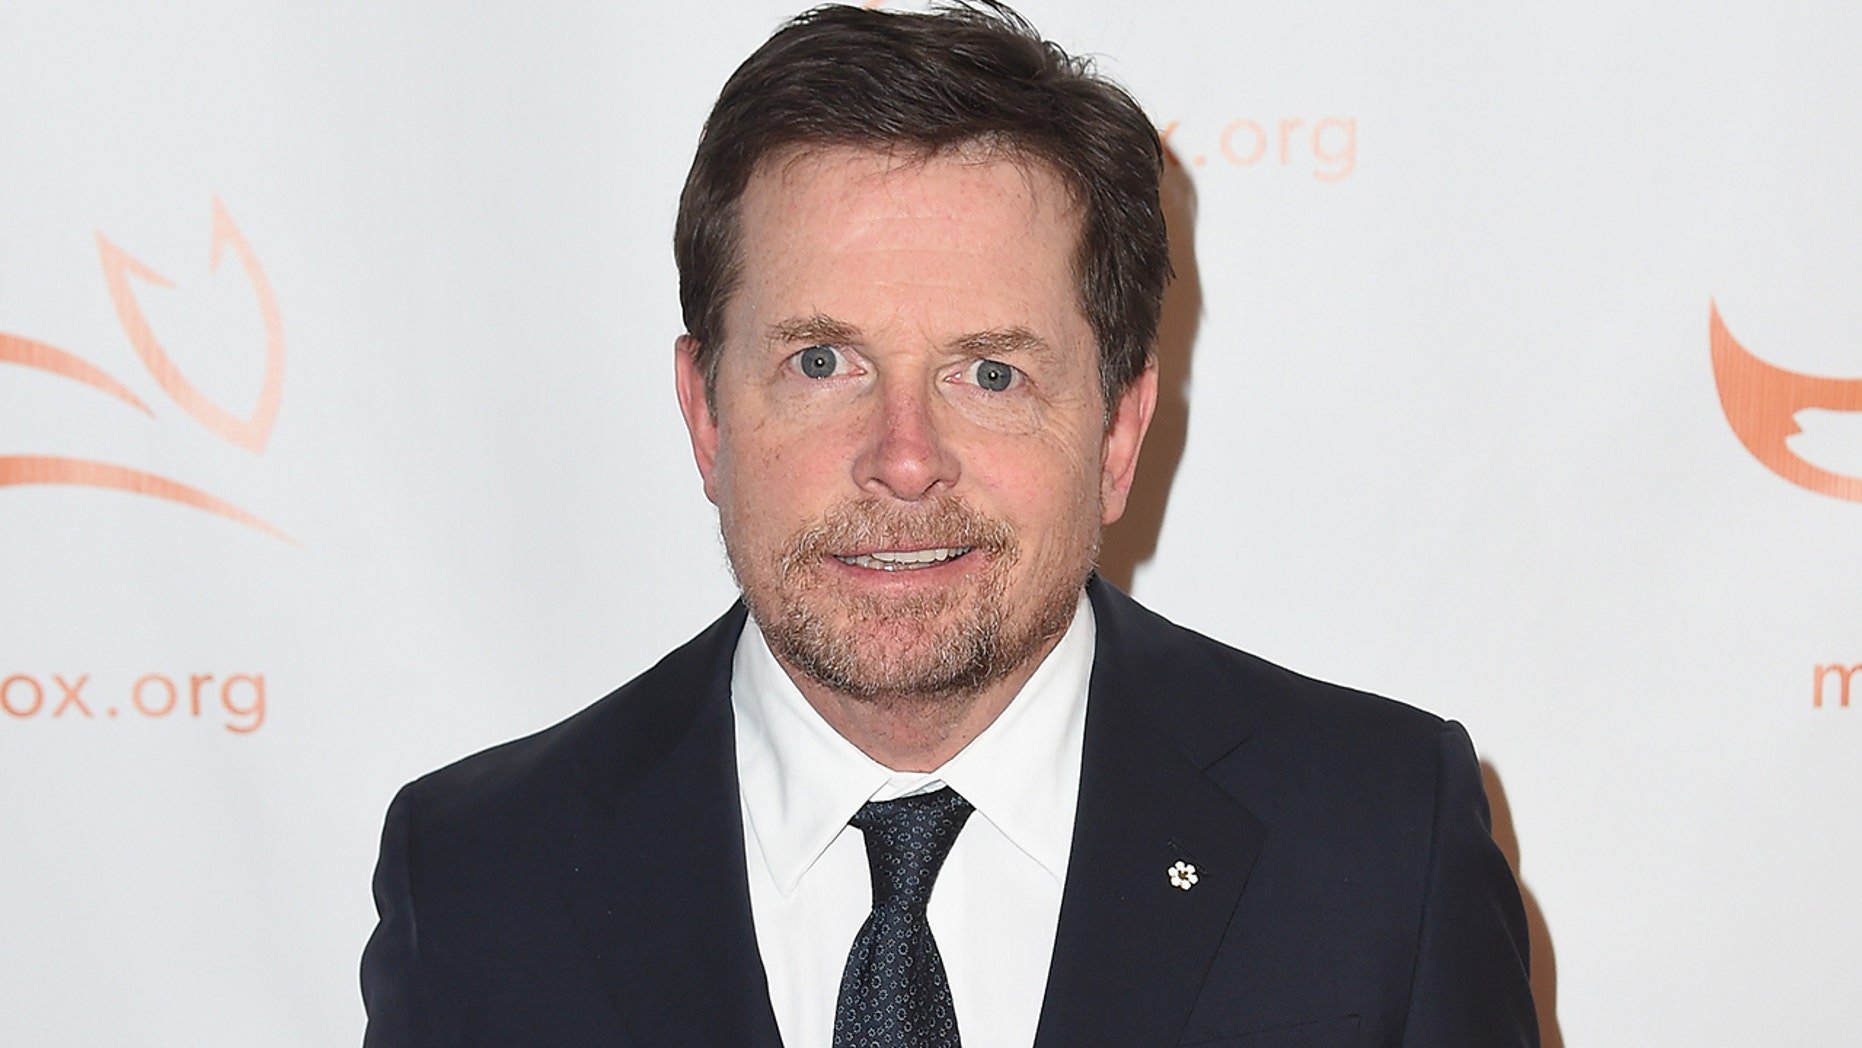 Michael J. Fox opens up about new health scares amid Parkinson